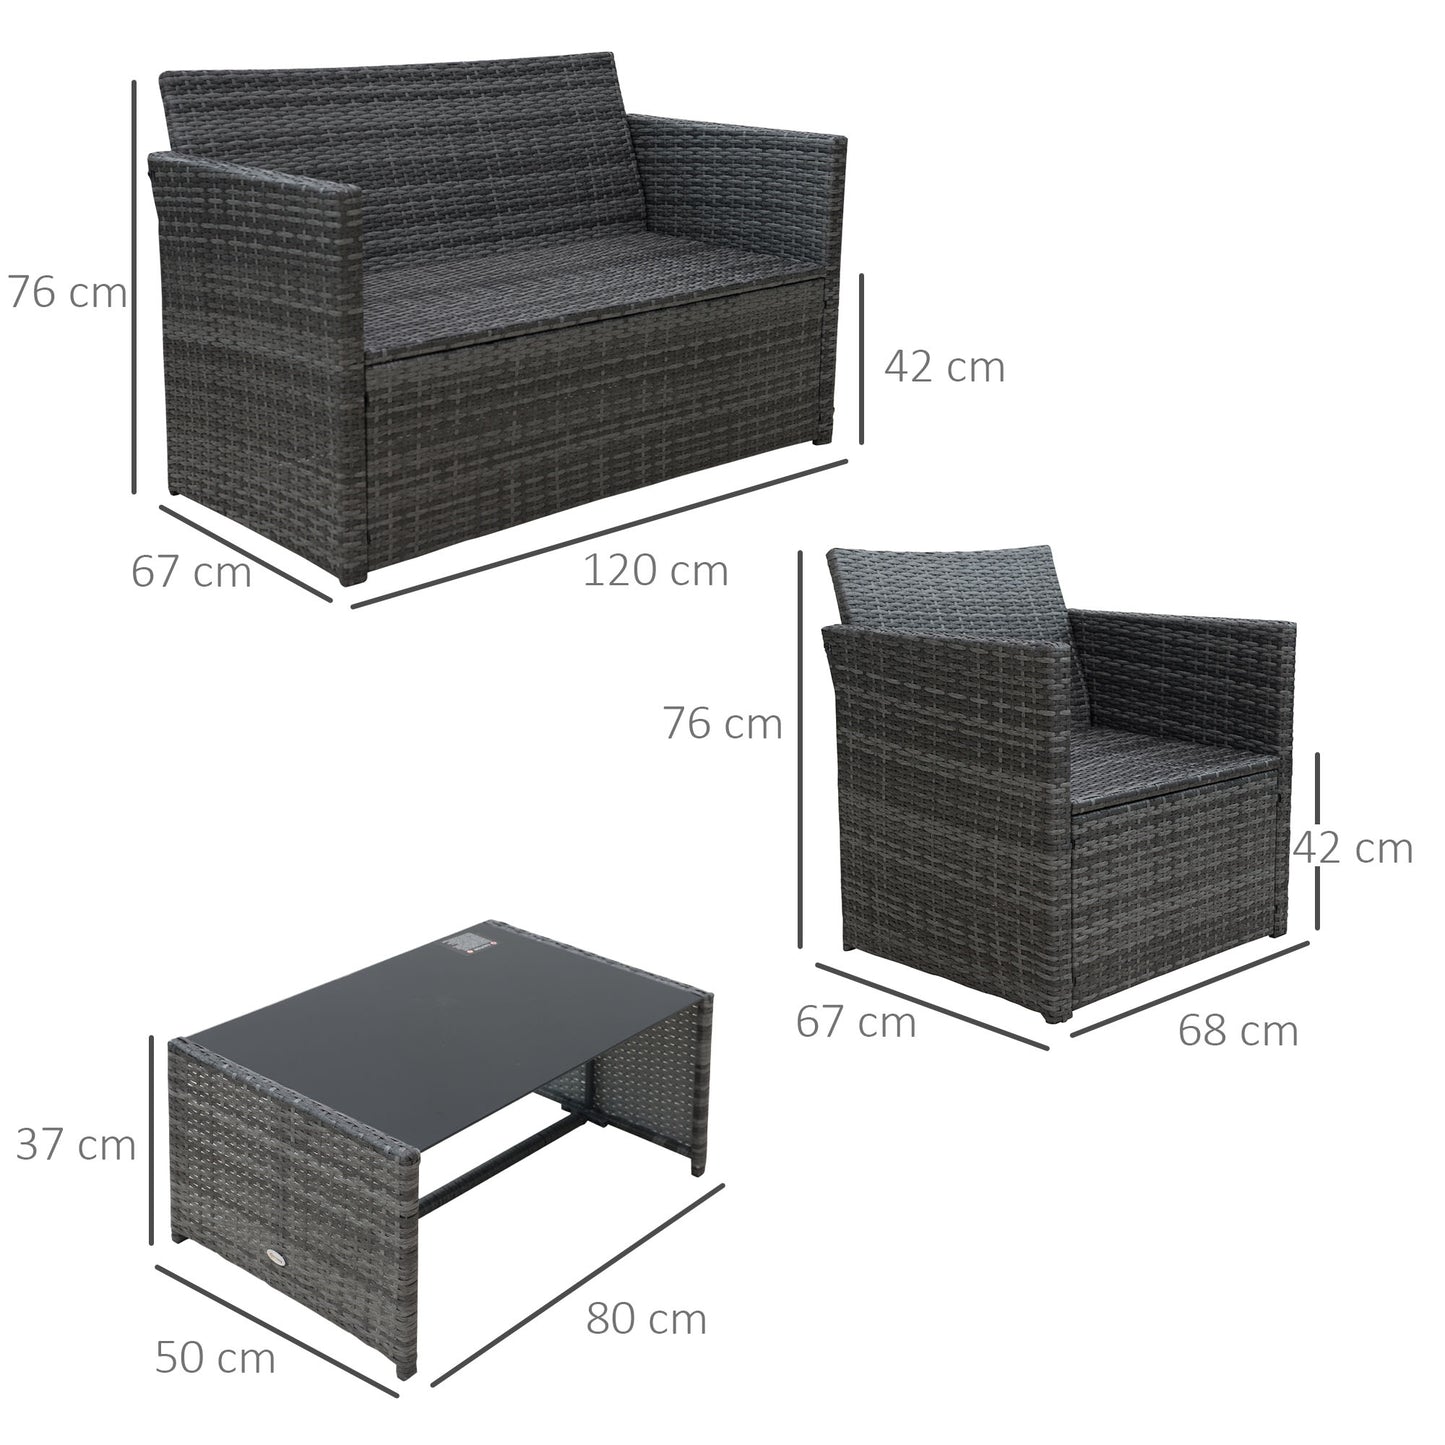 Outsunny 4-Seater Rattan Garden Furniture Sofa Set Outdoor Patio Wicker Weave 2-seater Bench Chairs & Coffee Table, Grey